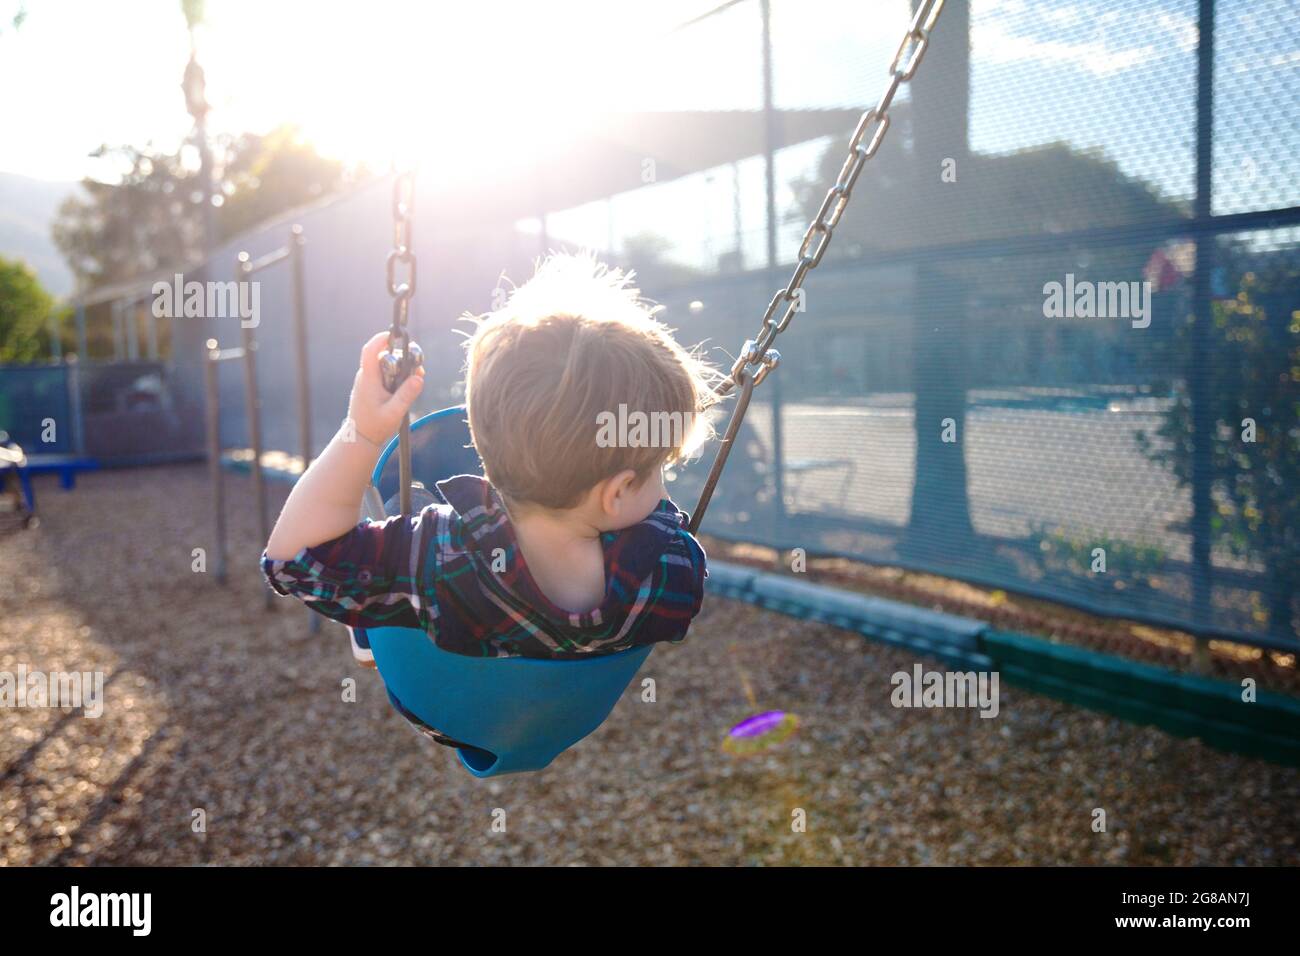 Modern colorful kids playground - swings, slides, steps and ladders. Outdoor plastic playing area for children.  Little boy on swing and slide. Stock Photo